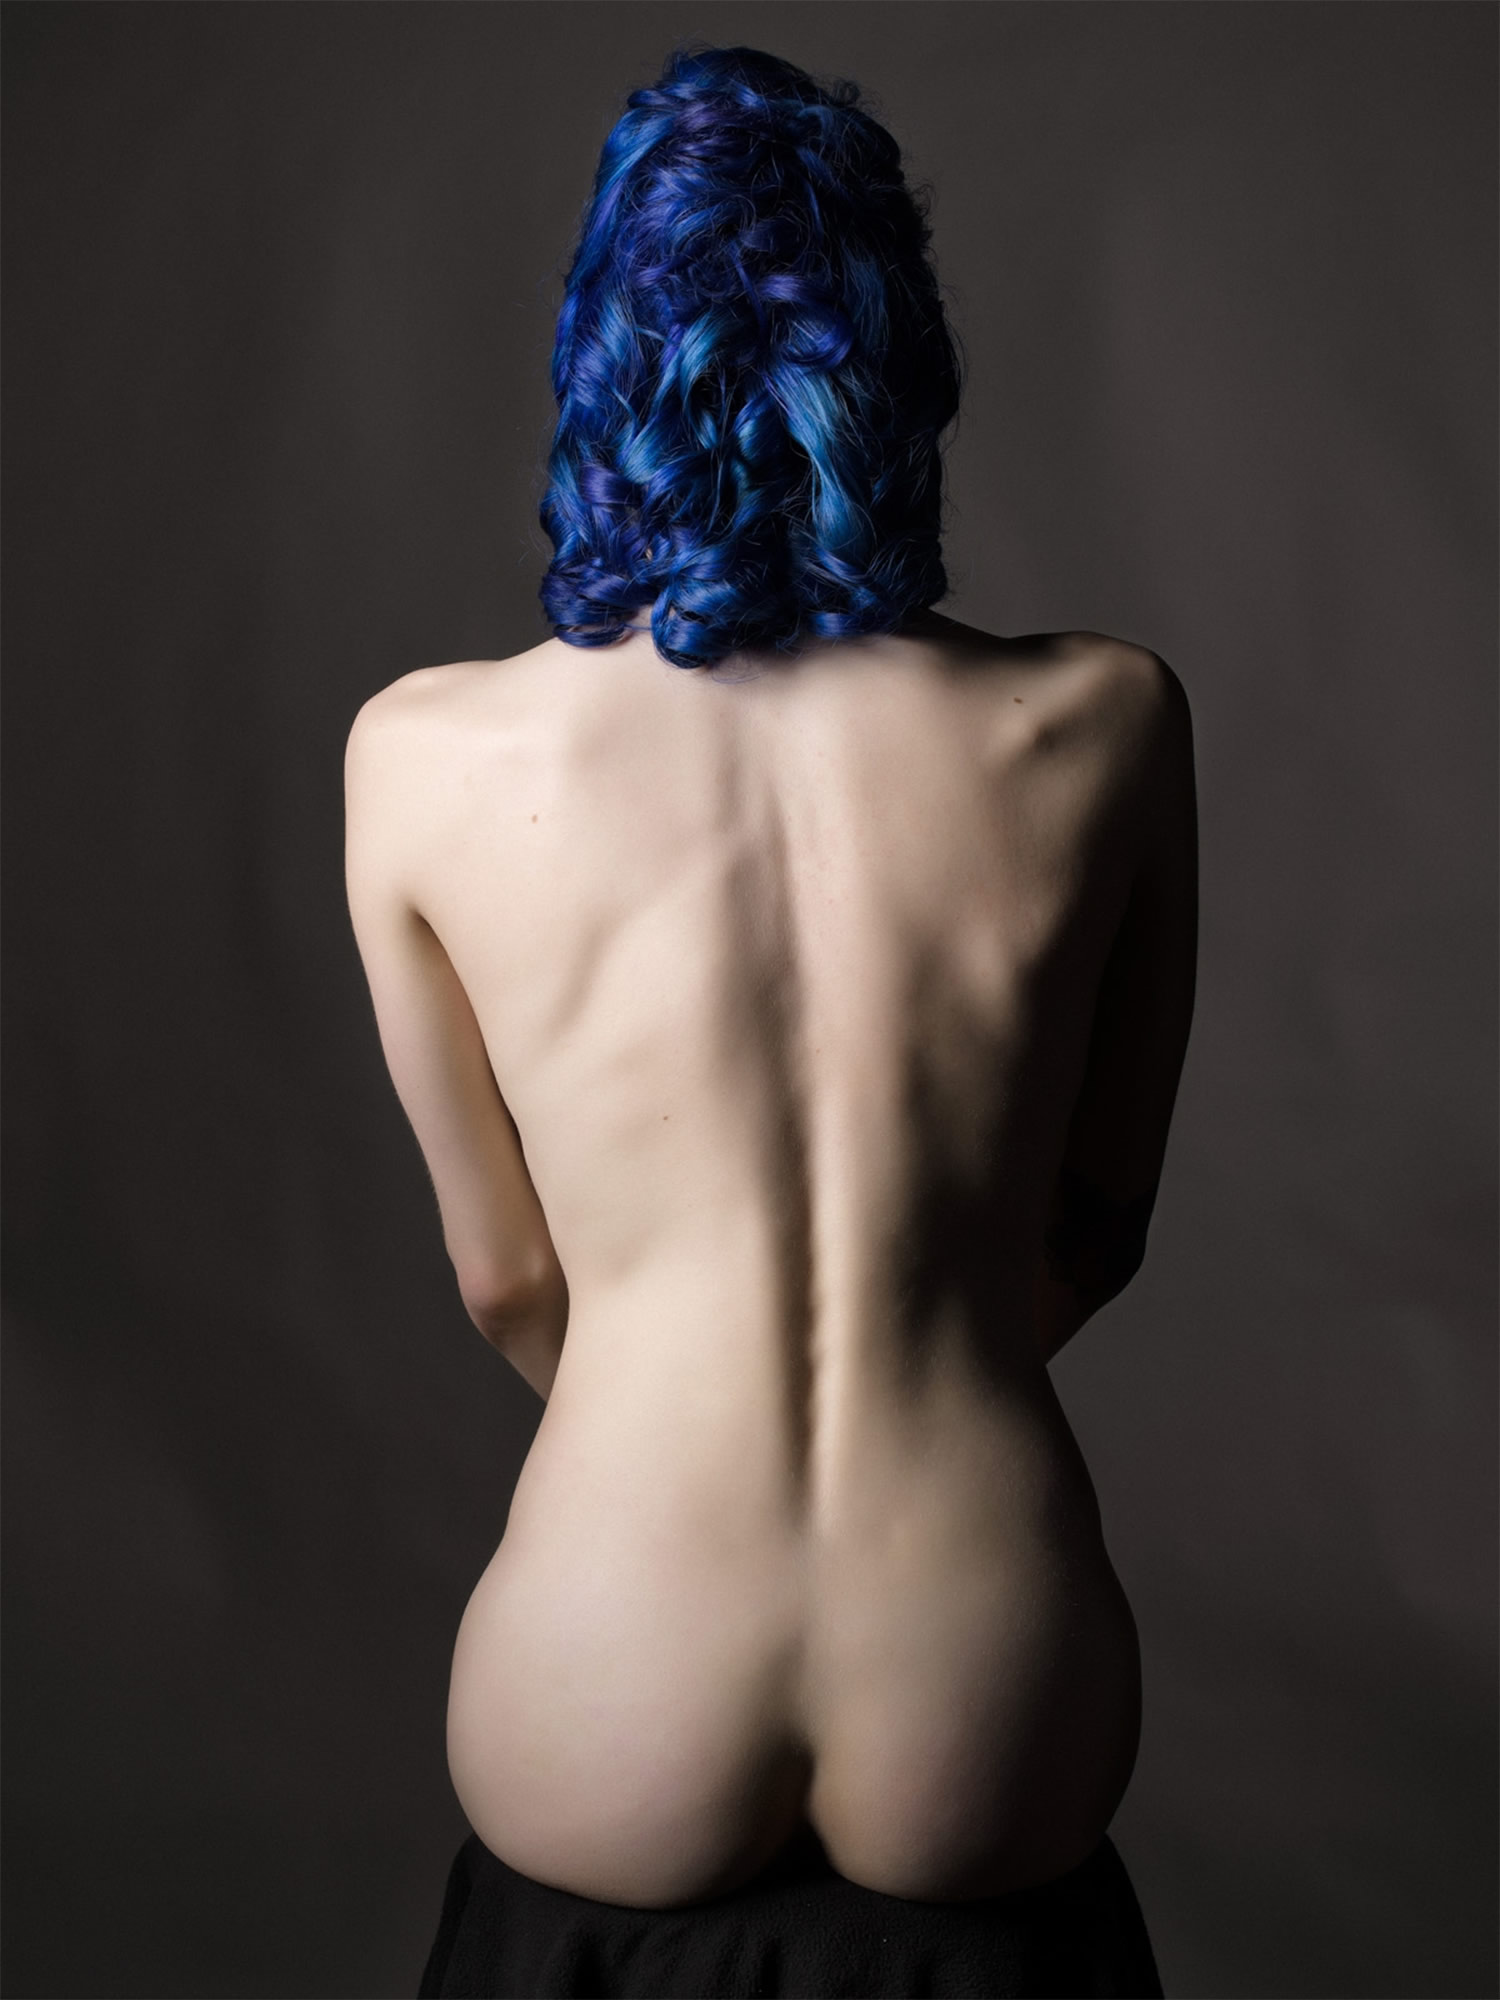 Camille nude study #2 by bruce walker, nude study, surrealist style